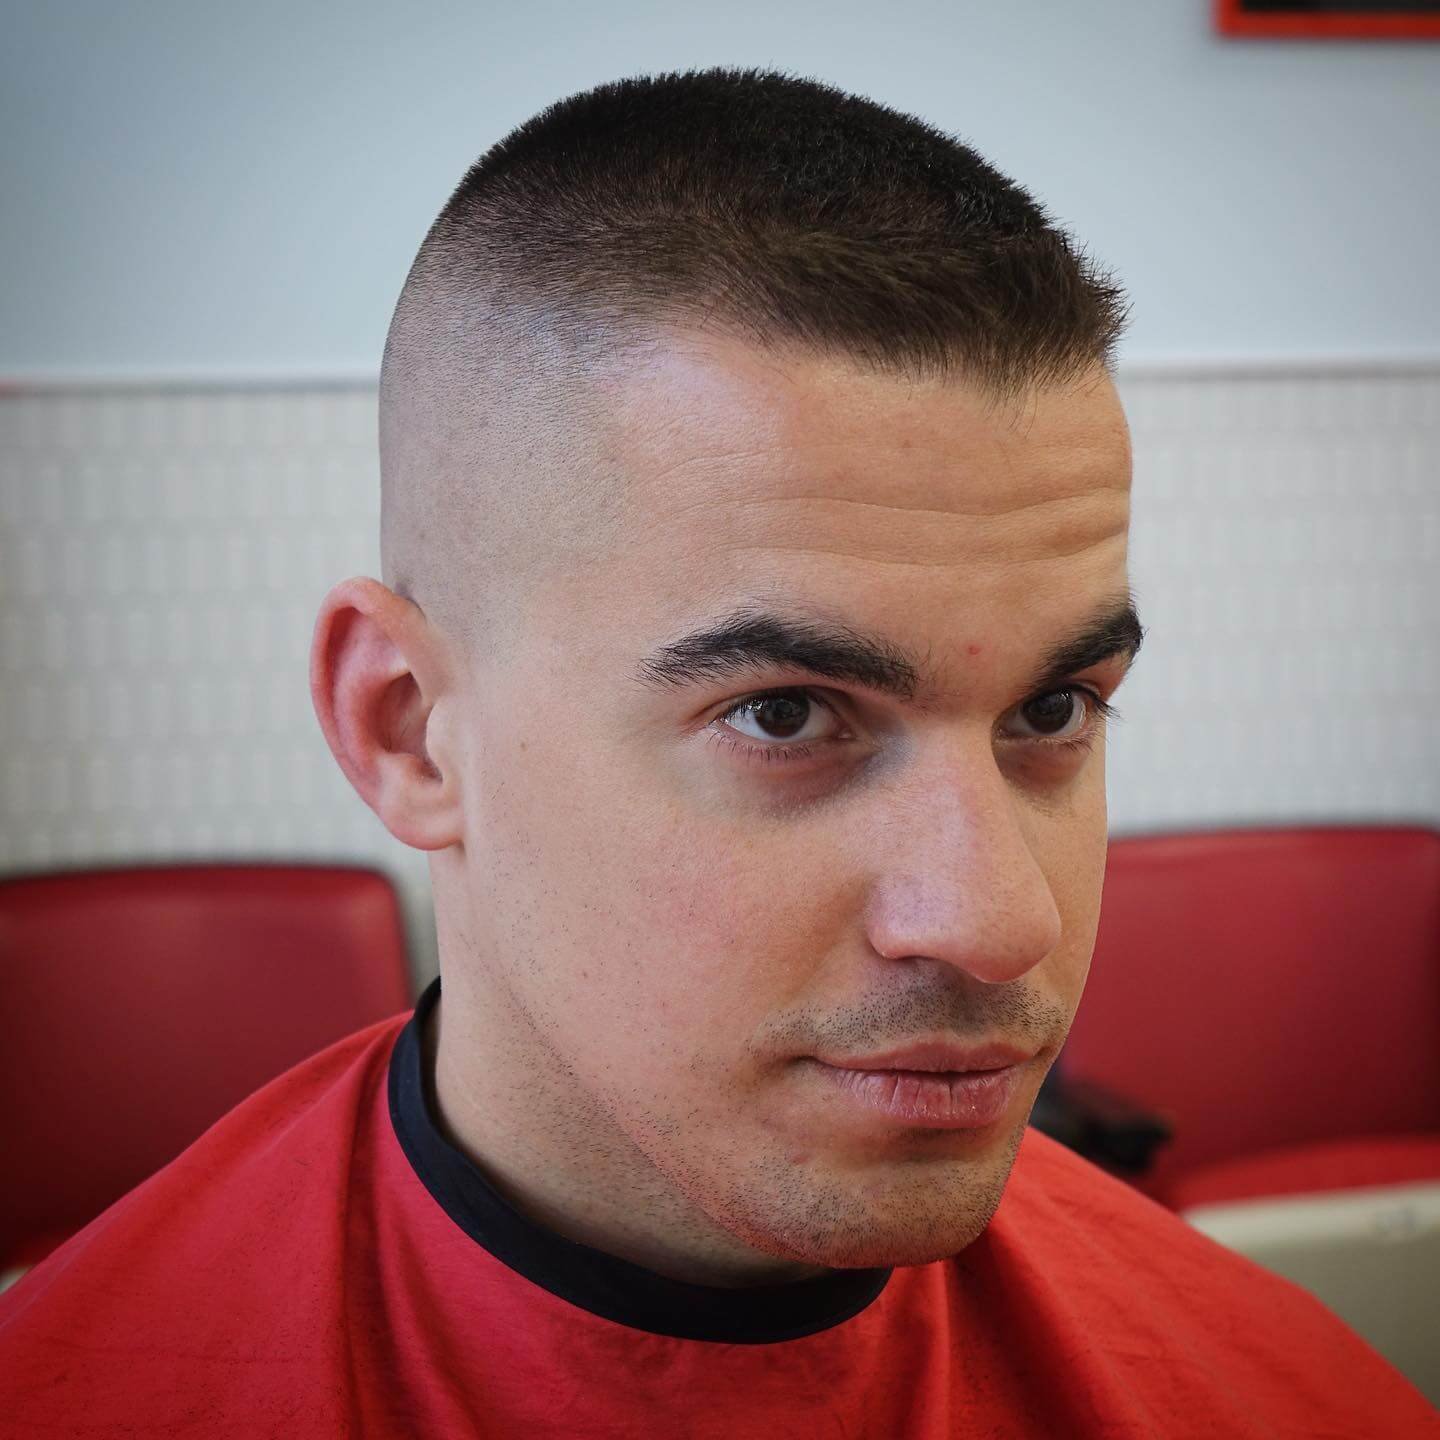 High and tight men's hairstyles for thin hair
